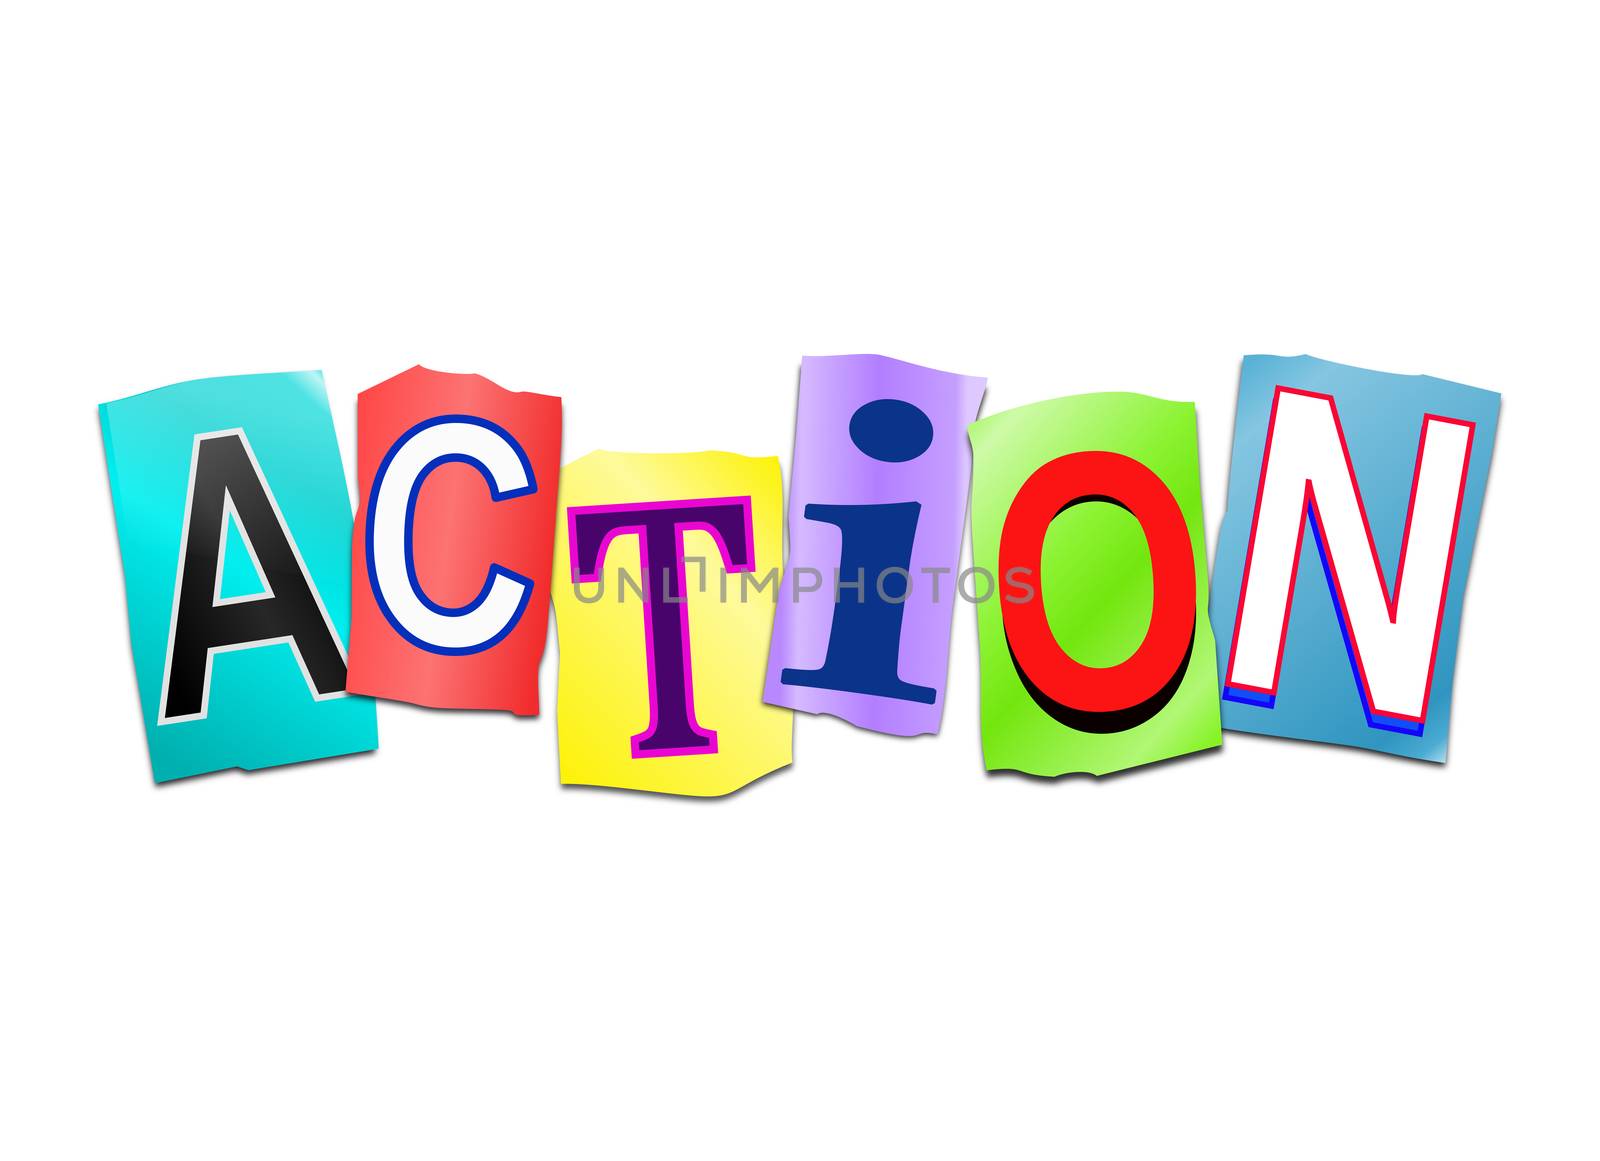 Illustration depicting a set of cut out printed letters arranged to form the word action.